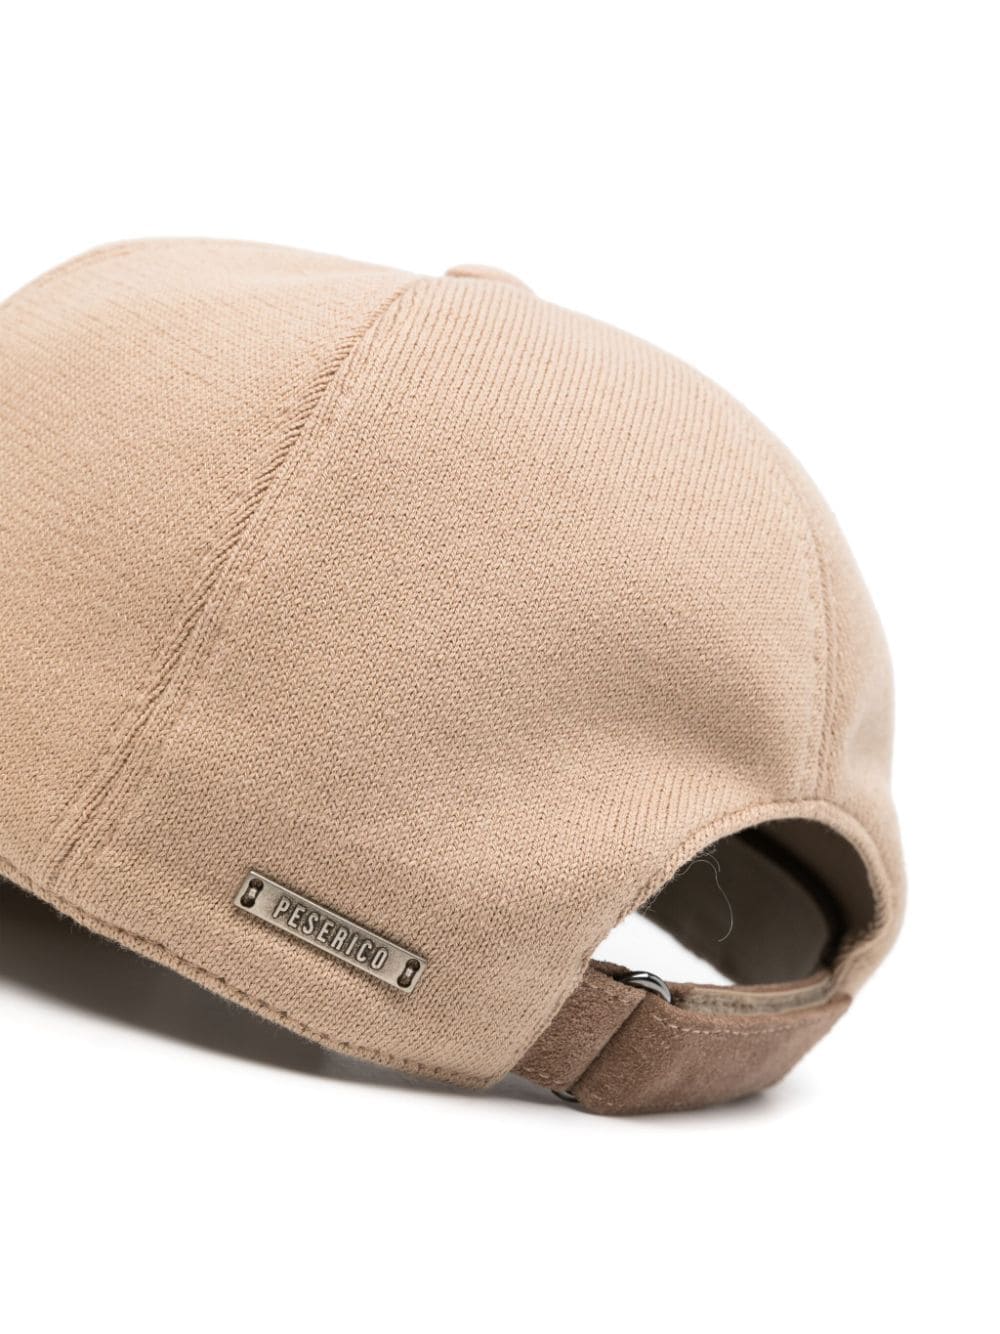 Peserico logo-plaque knitted cap - Beige